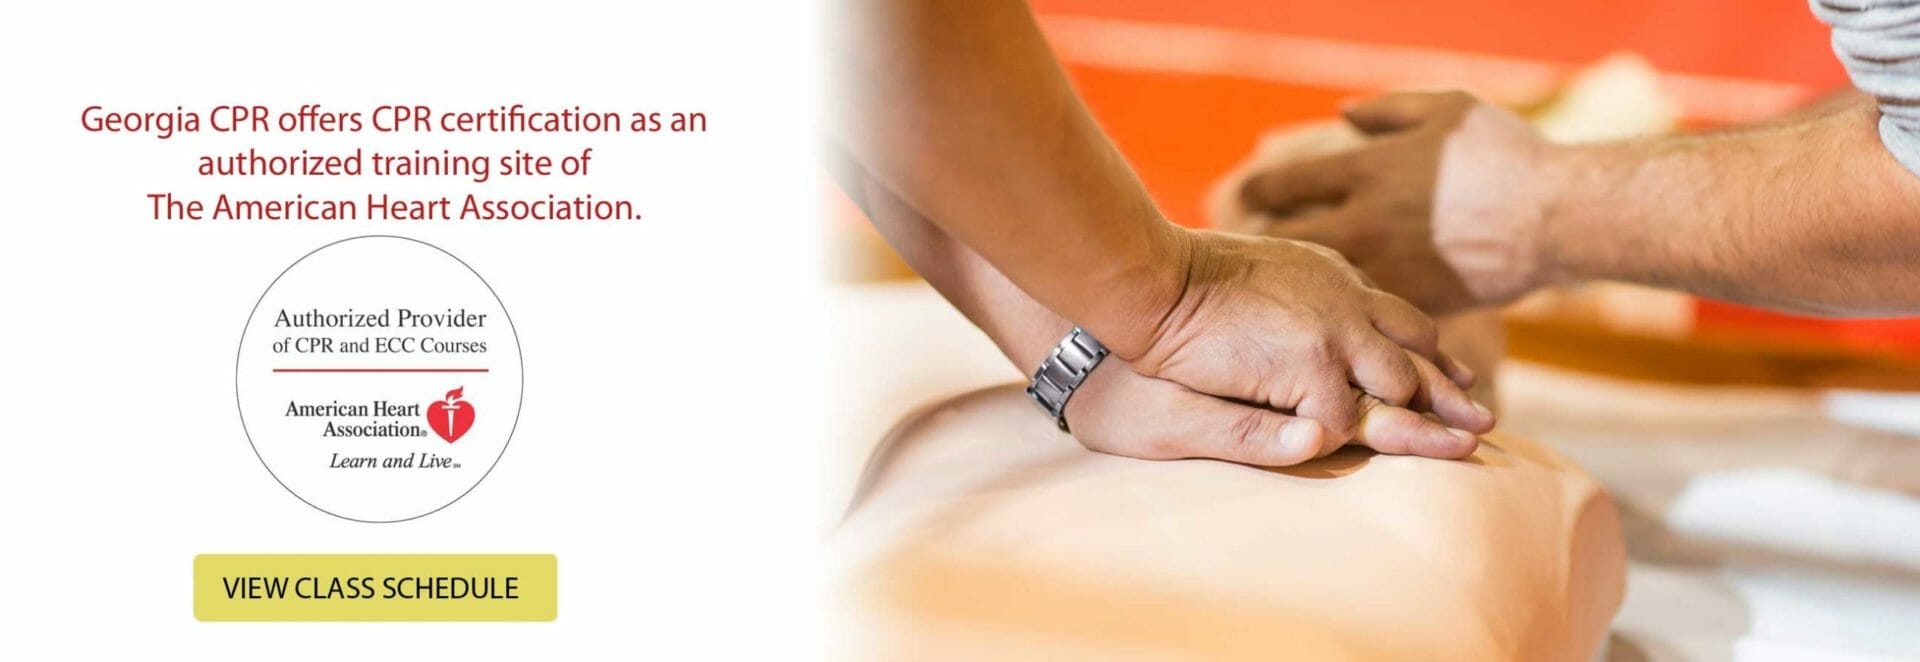 Georgia CPR offers CPR Certification as an authorized training site of the American Heart Association